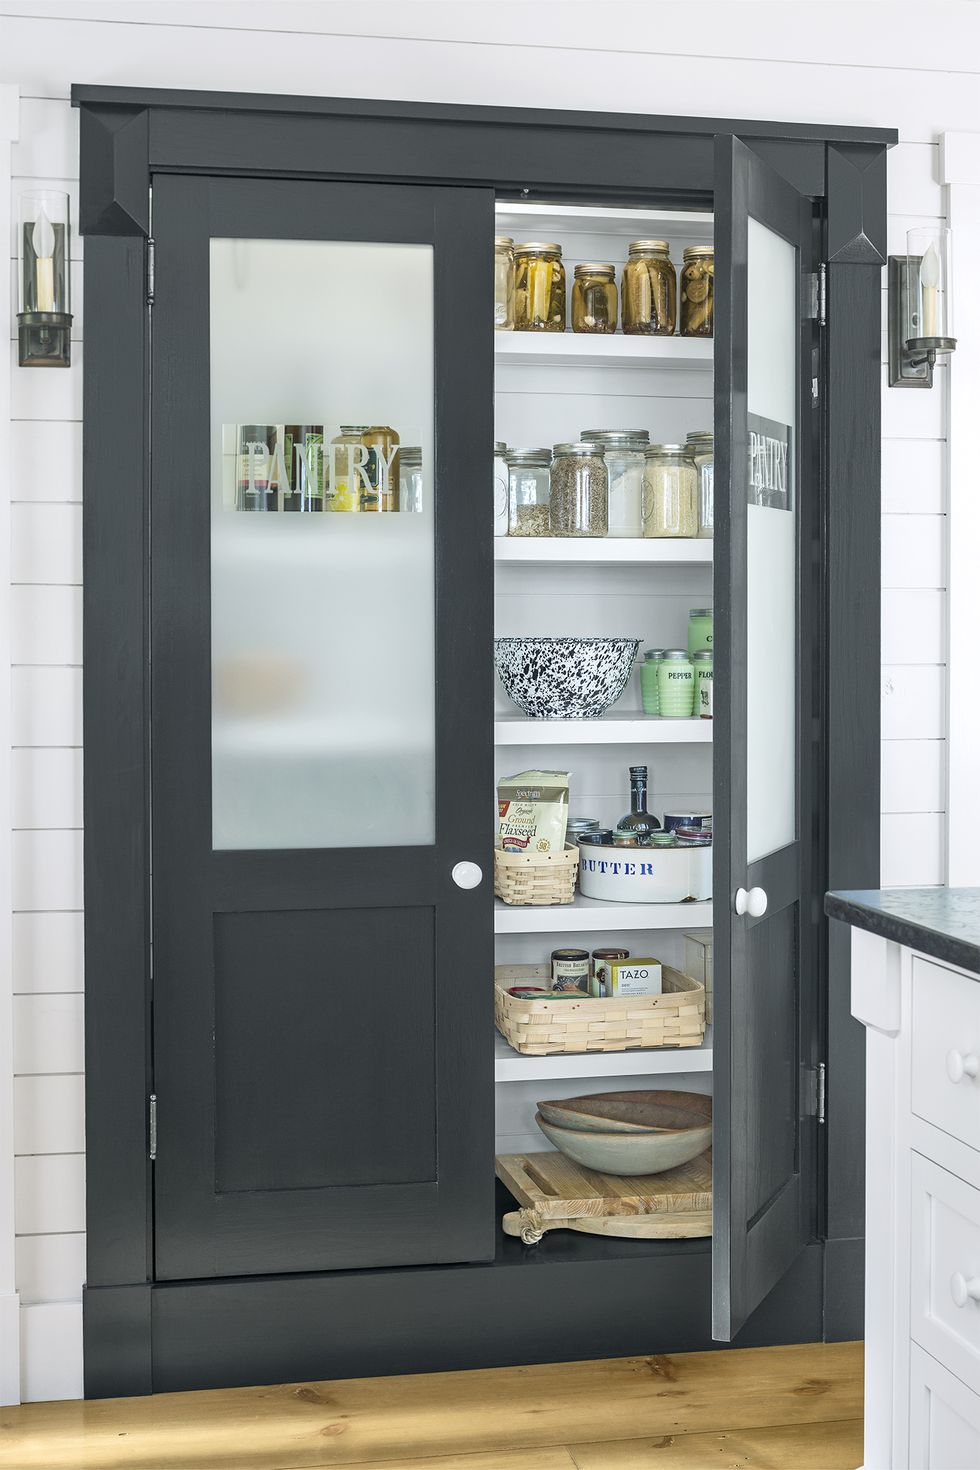 https://hips.hearstapps.com/hmg-prod/images/pantry-organization-ideas-frosted-glass-1580410274.jpg?crop=1xw:0.99975xh;center,top&resize=980:*